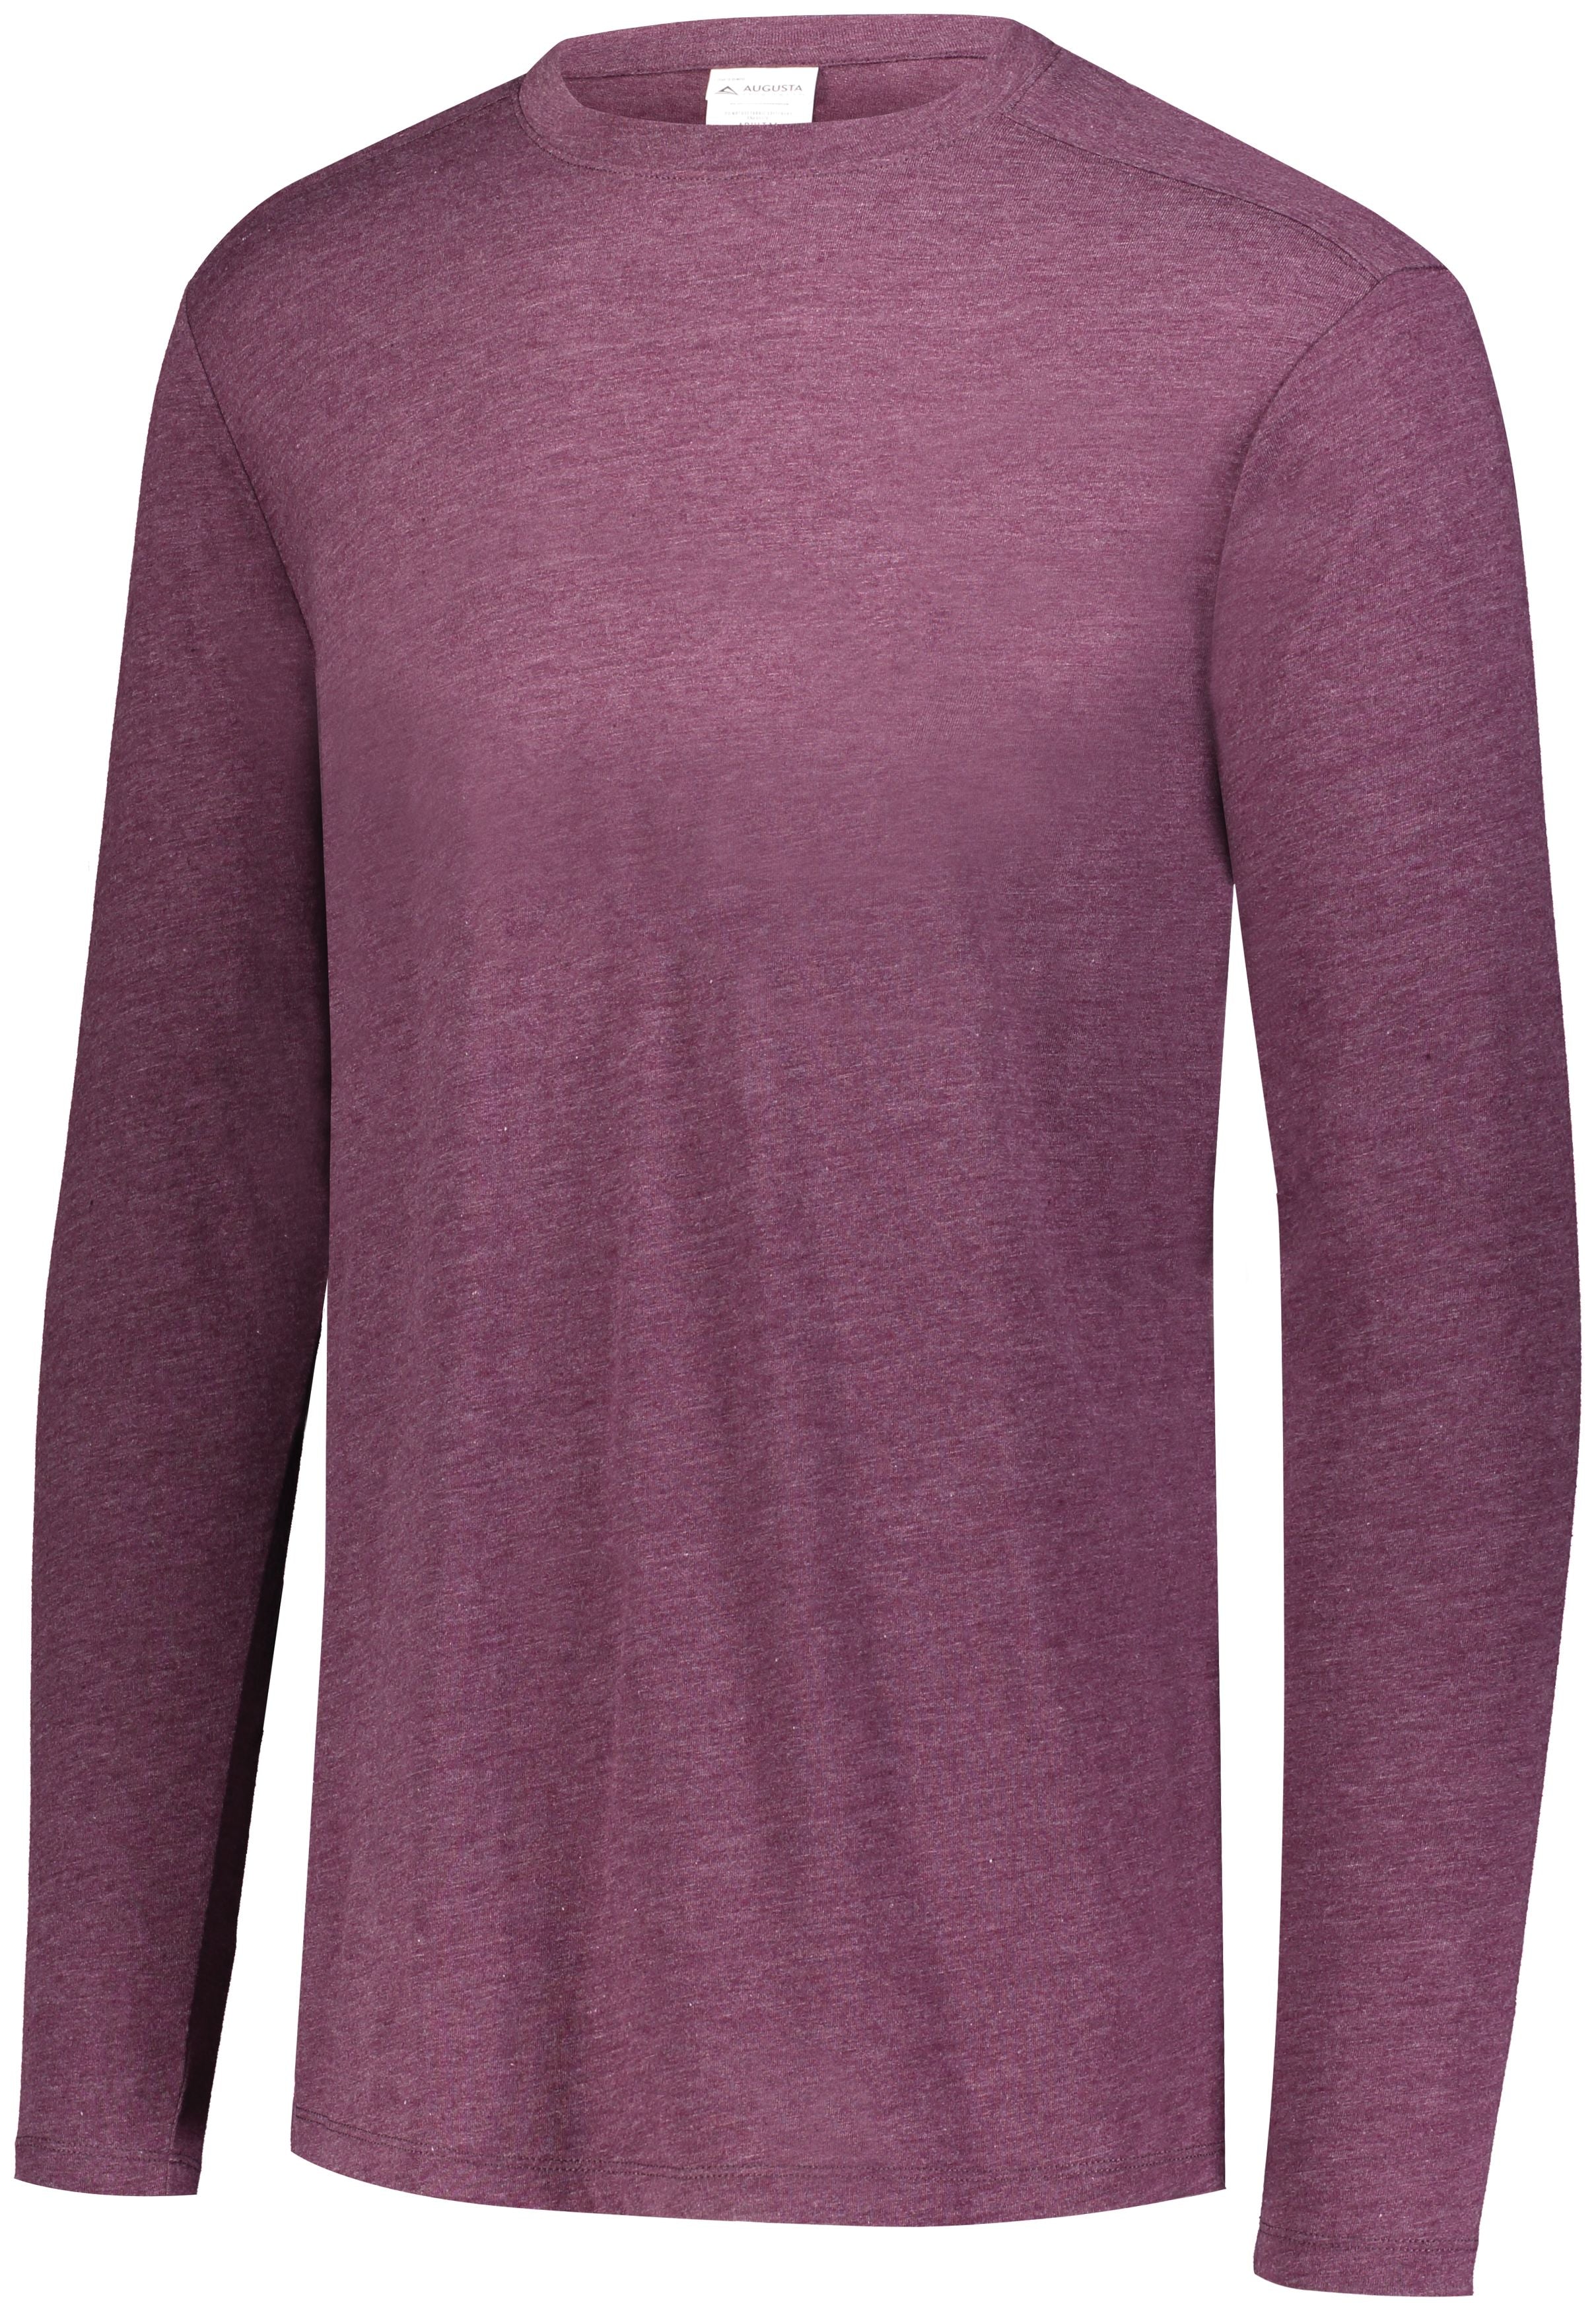 Augusta Sportswear Tri-Blend Long Sleeve Crew in Maroon Heather  -Part of the Adult, Augusta-Products, Shirts product lines at KanaleyCreations.com